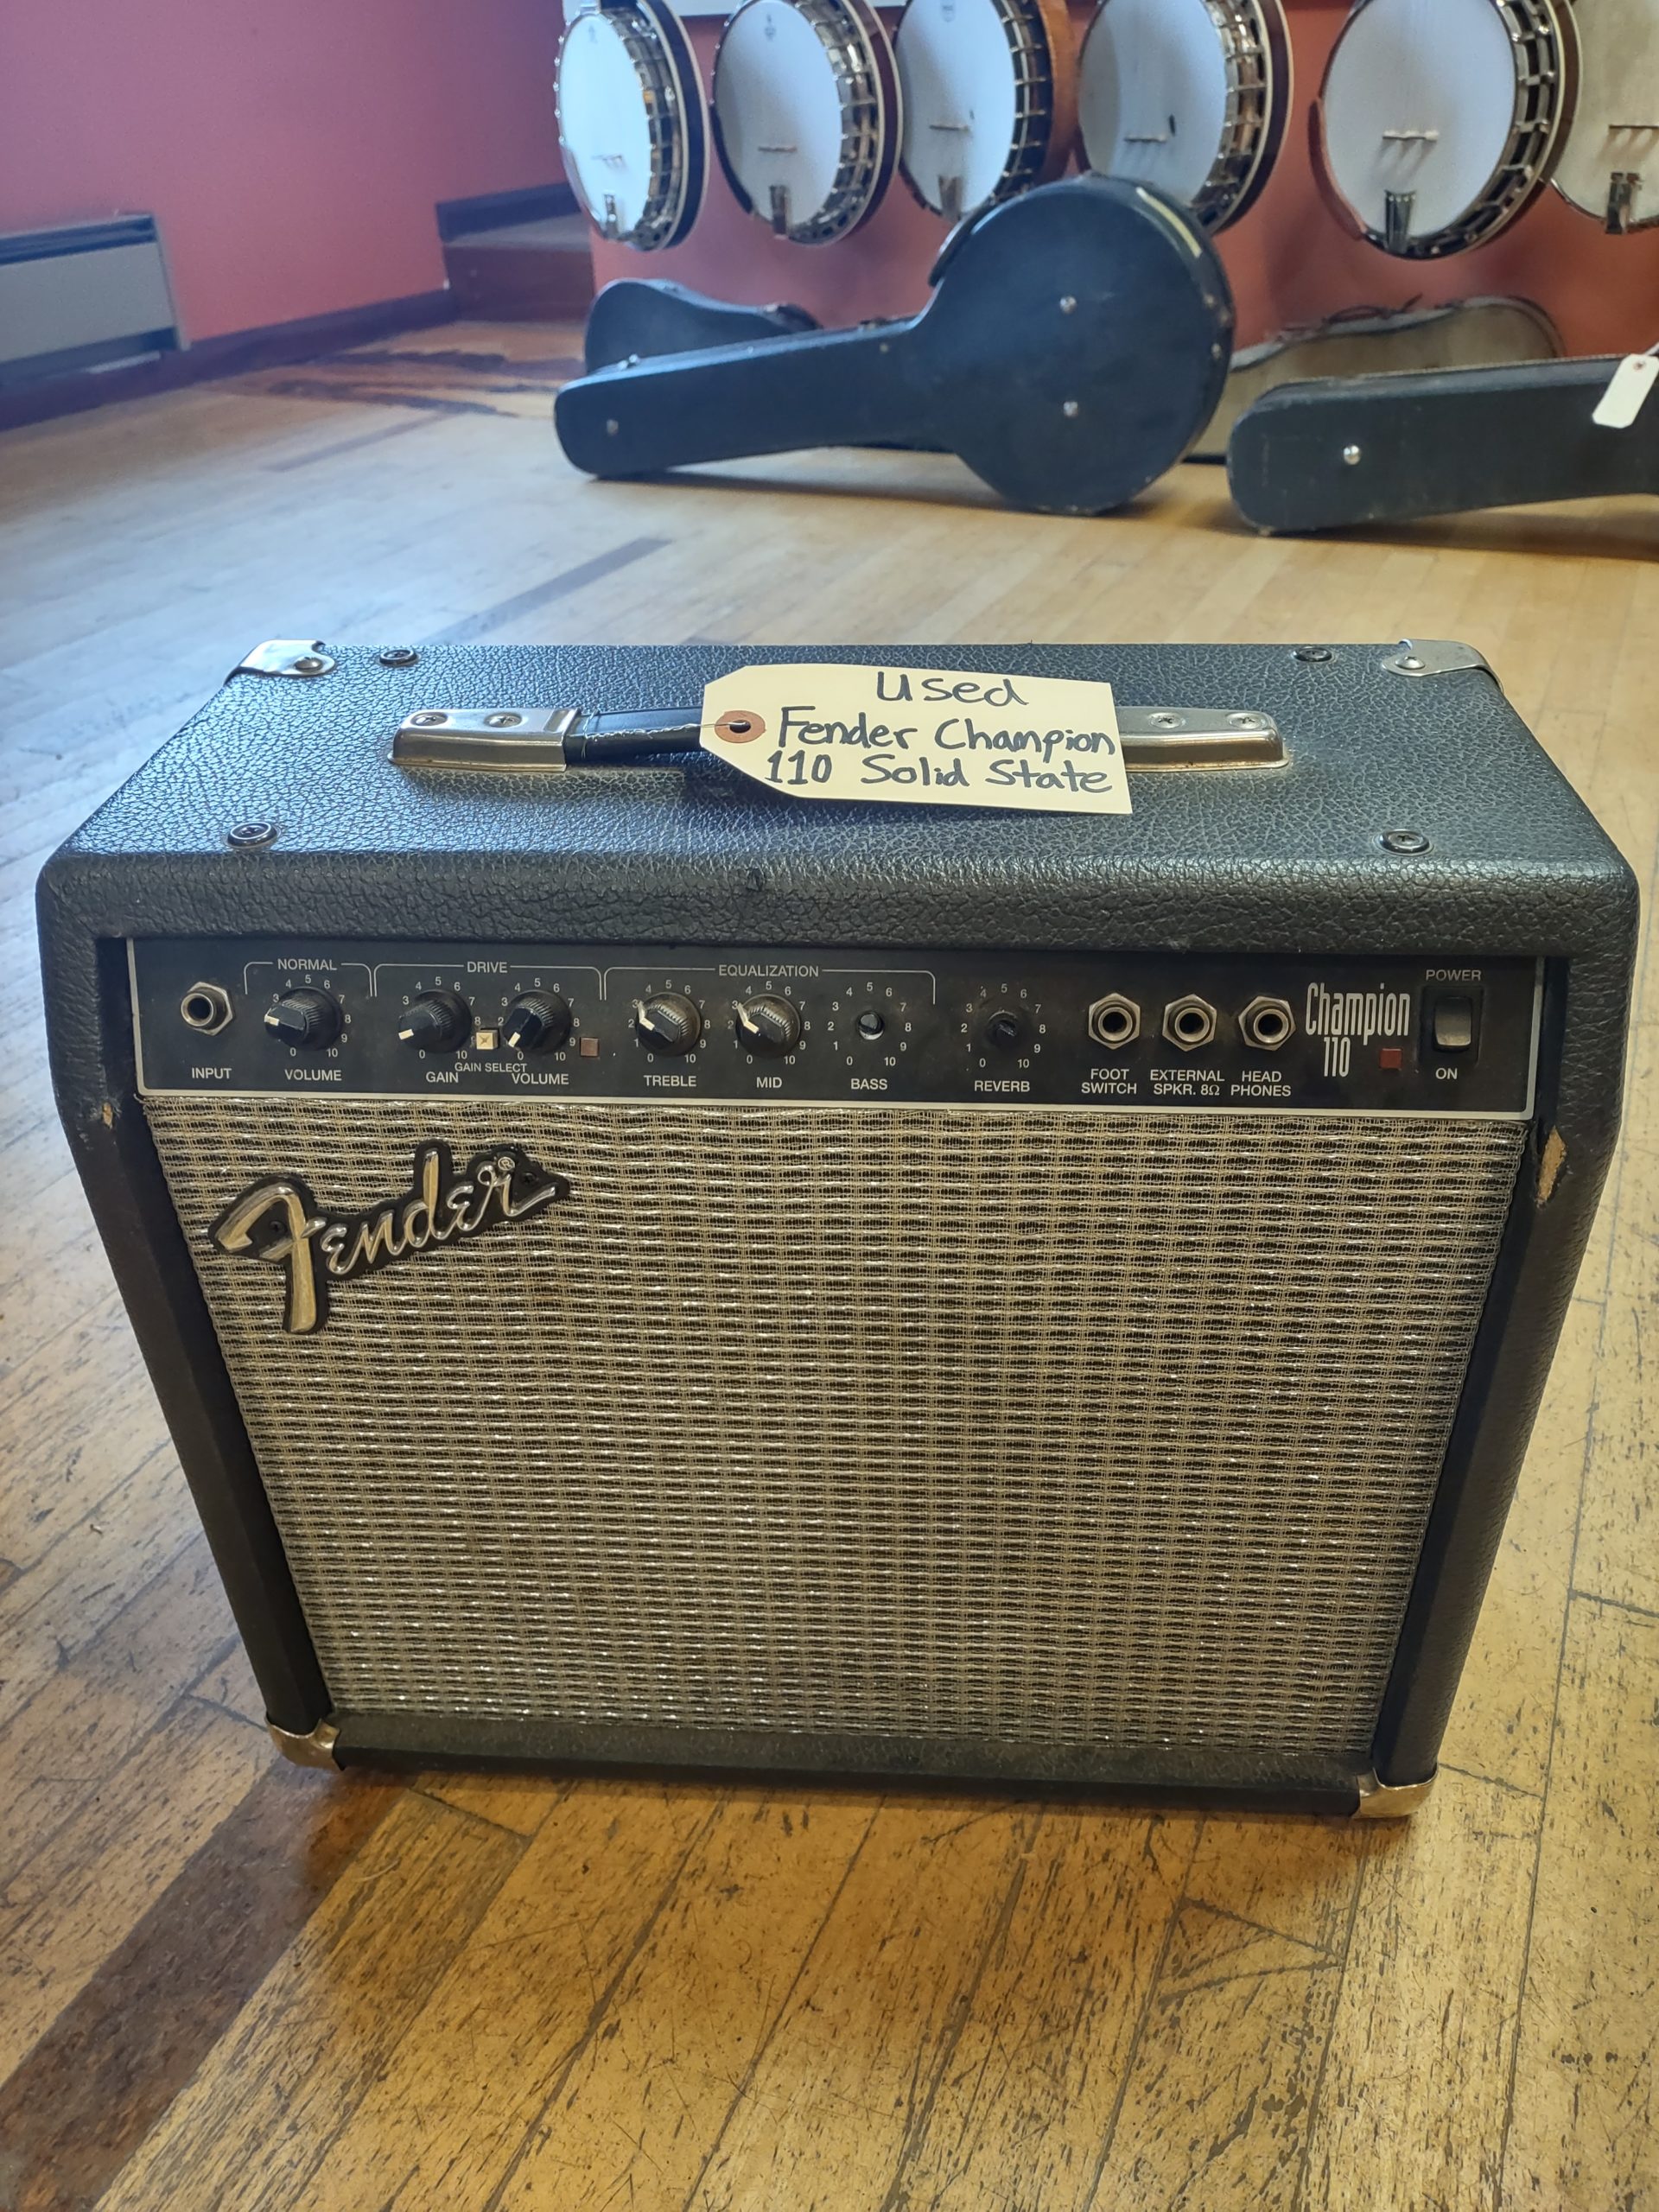 Used Fender Champion 110 Guitar Amplifier Product